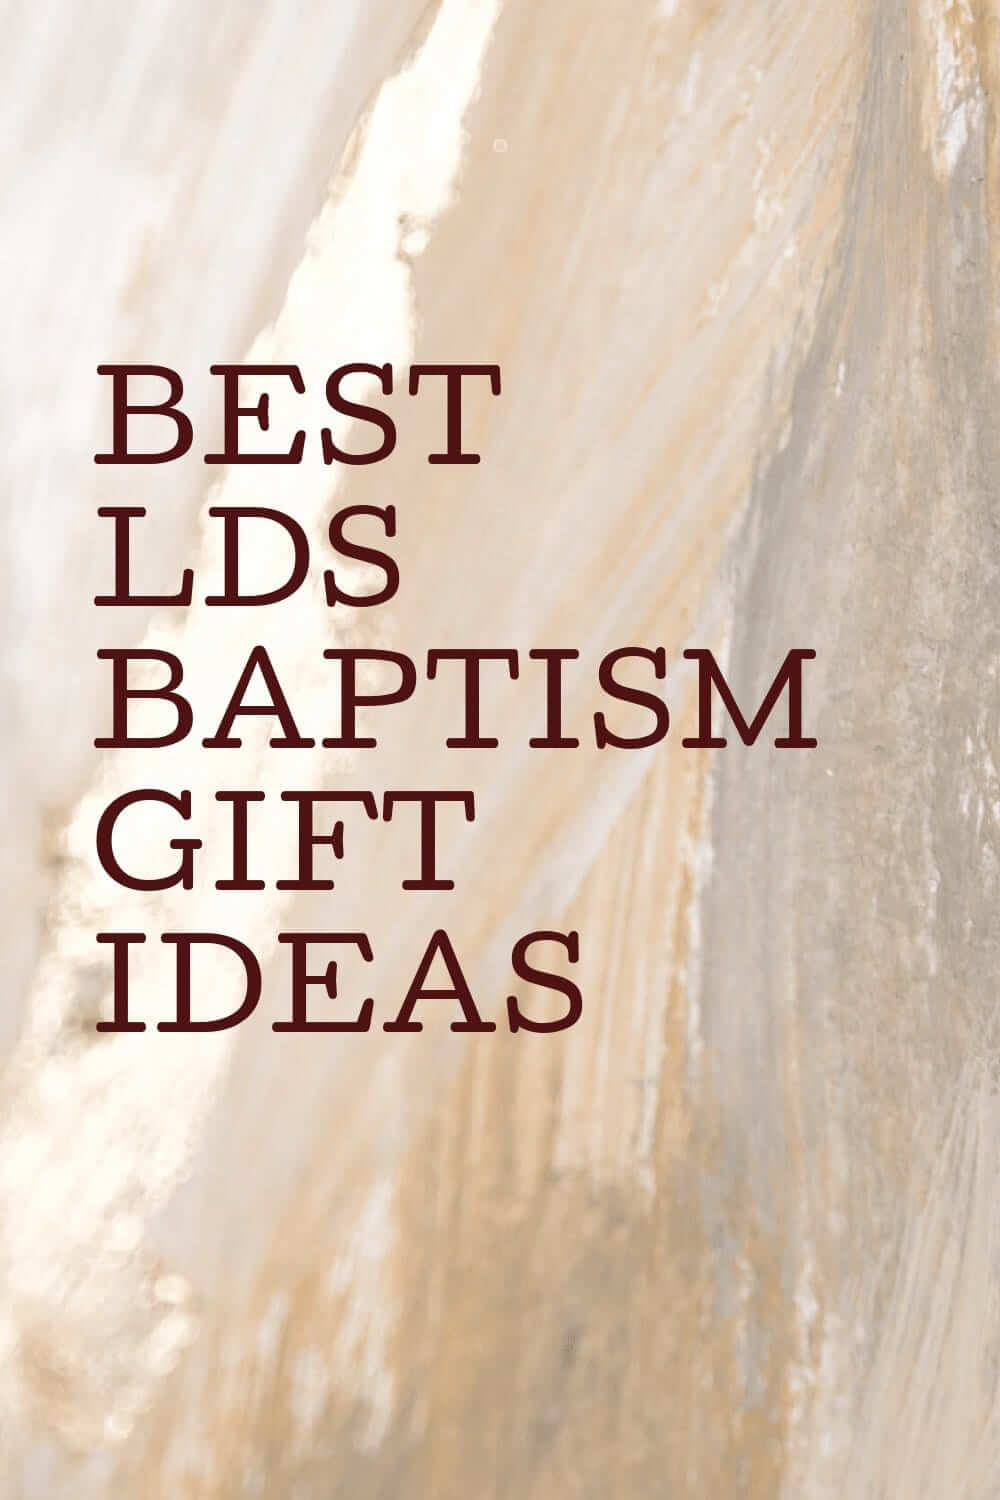 Best LDS Baptism Gifts